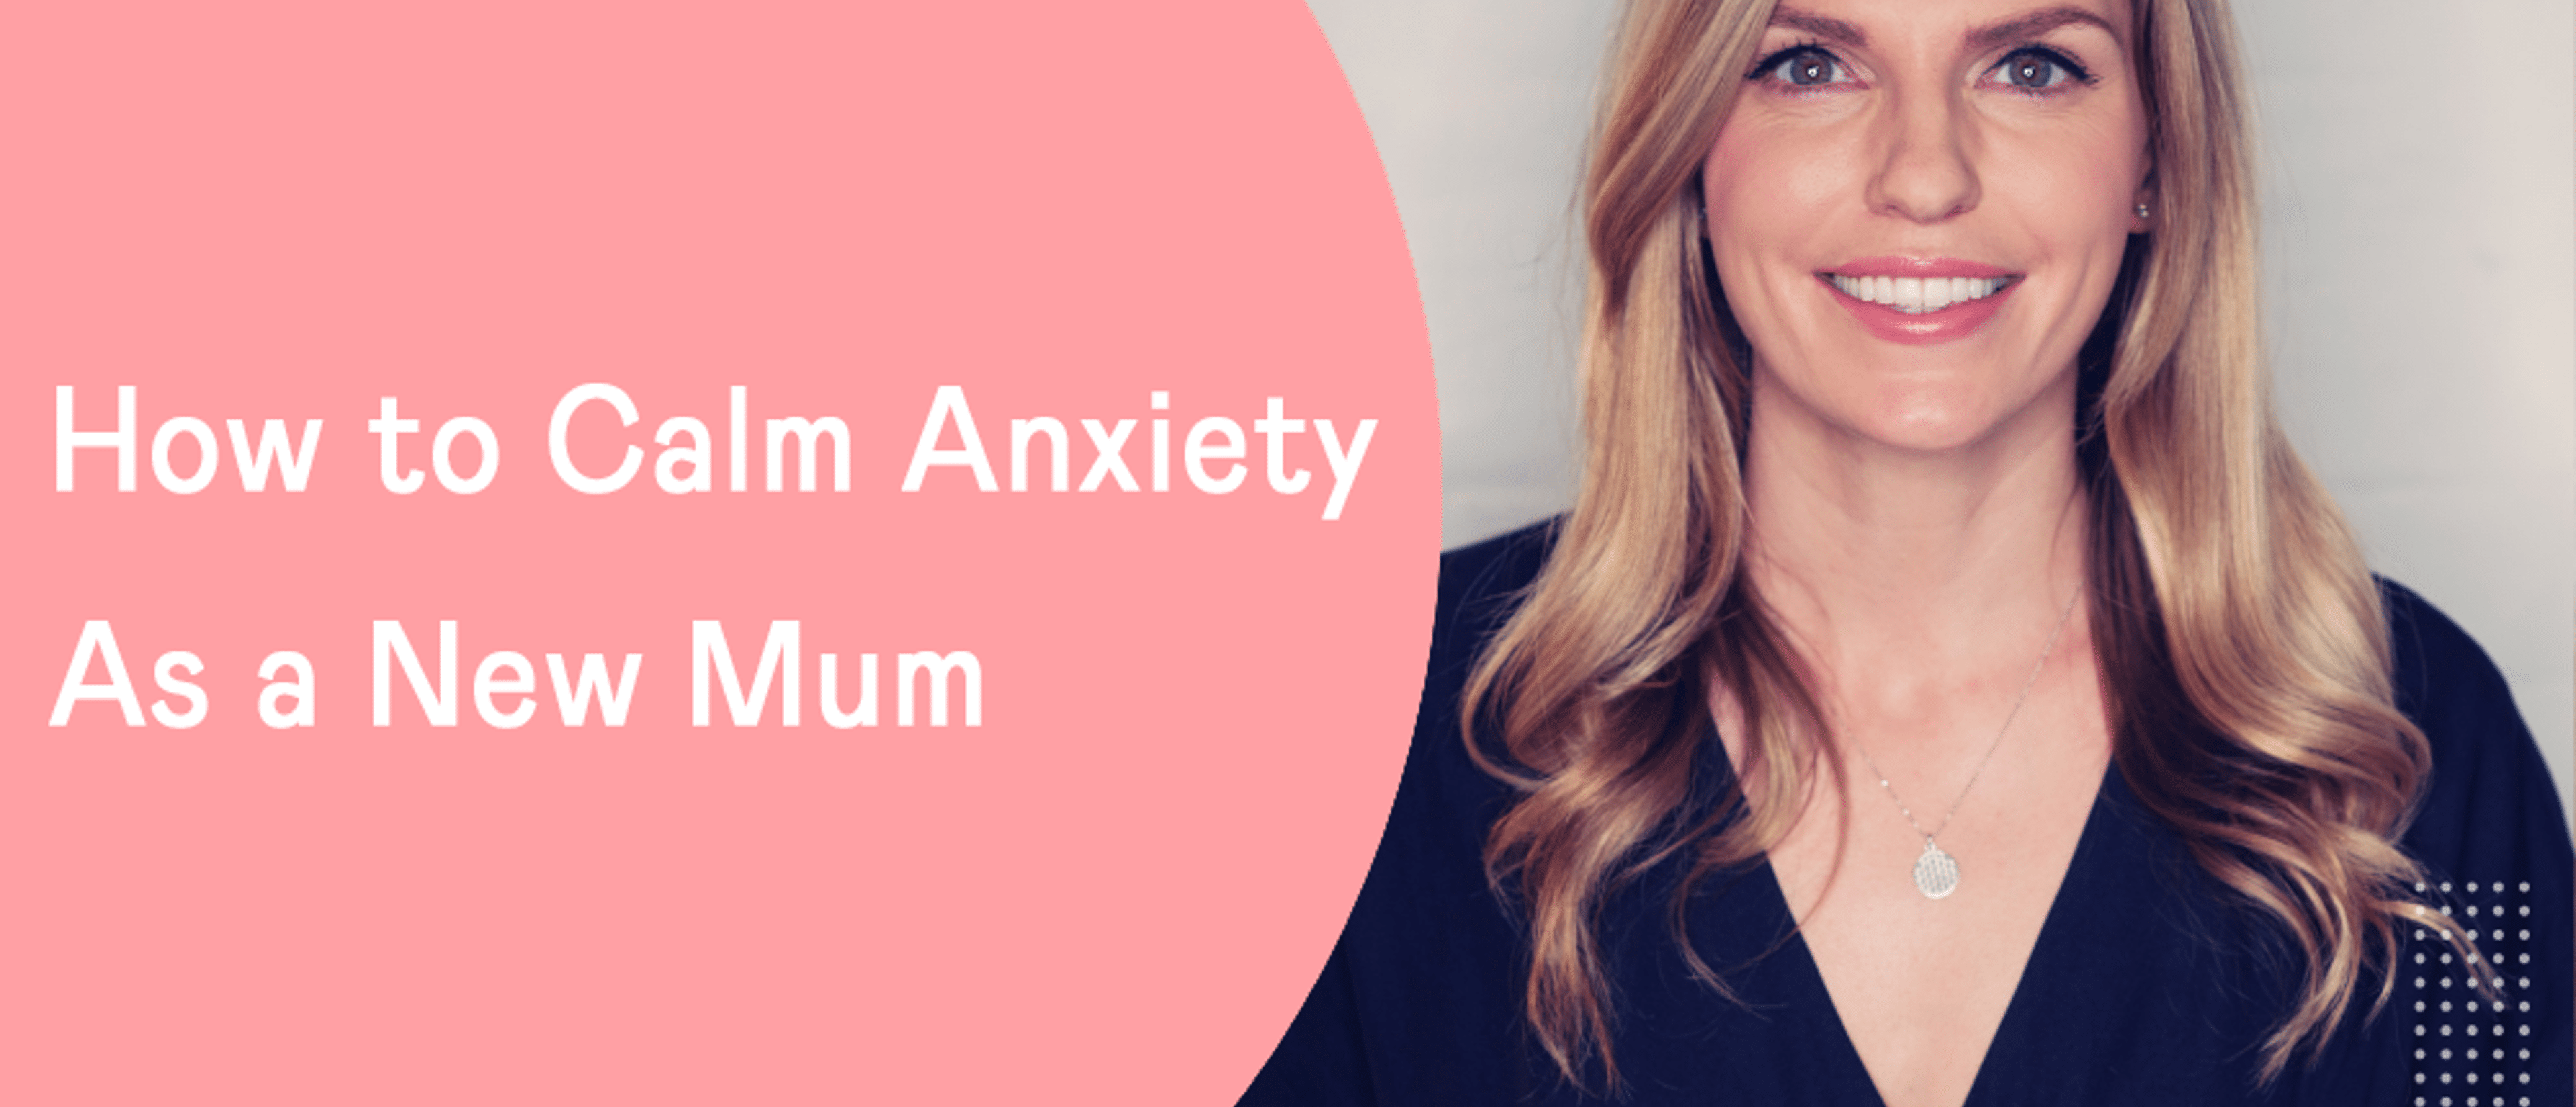 How to Calm Anxiety As a New Mum